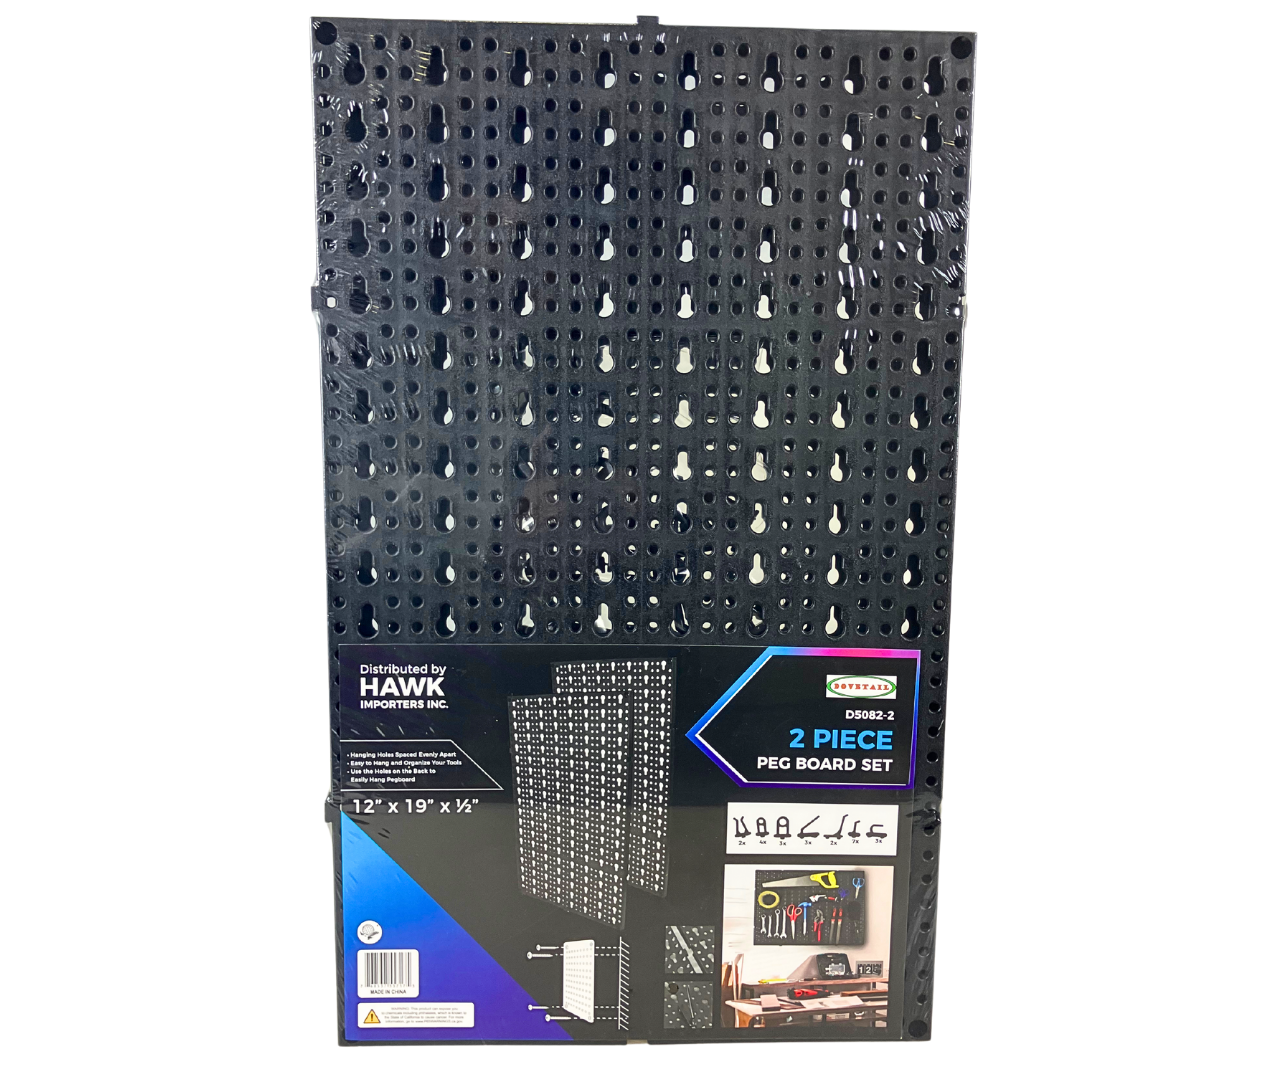 2 Piece Plastic Peg Board Set with 24 Assorted Hooks and Screws for Hanging | 19" x 12" Boards